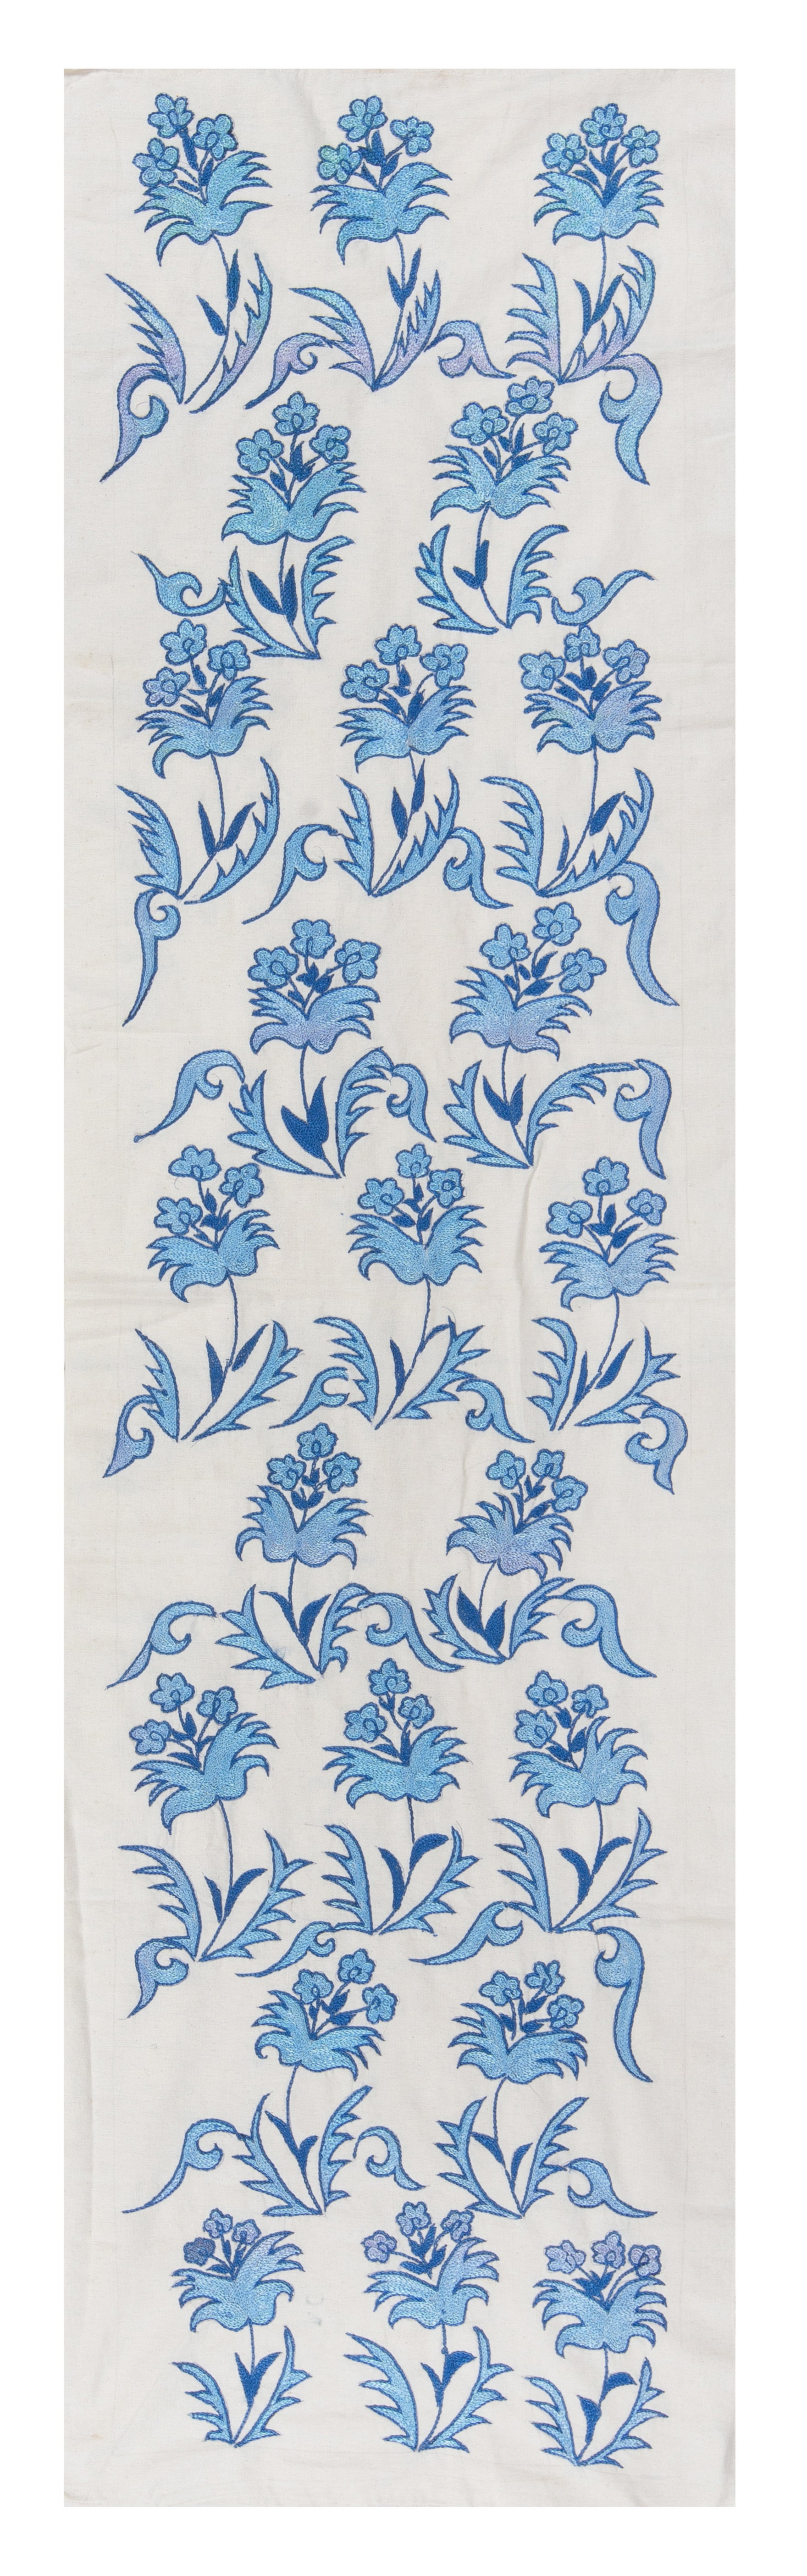 1.7x6.3 Ft Floral Suzani Table Runner, Embroidered Wall Hanging, Blue Tapestry en vente